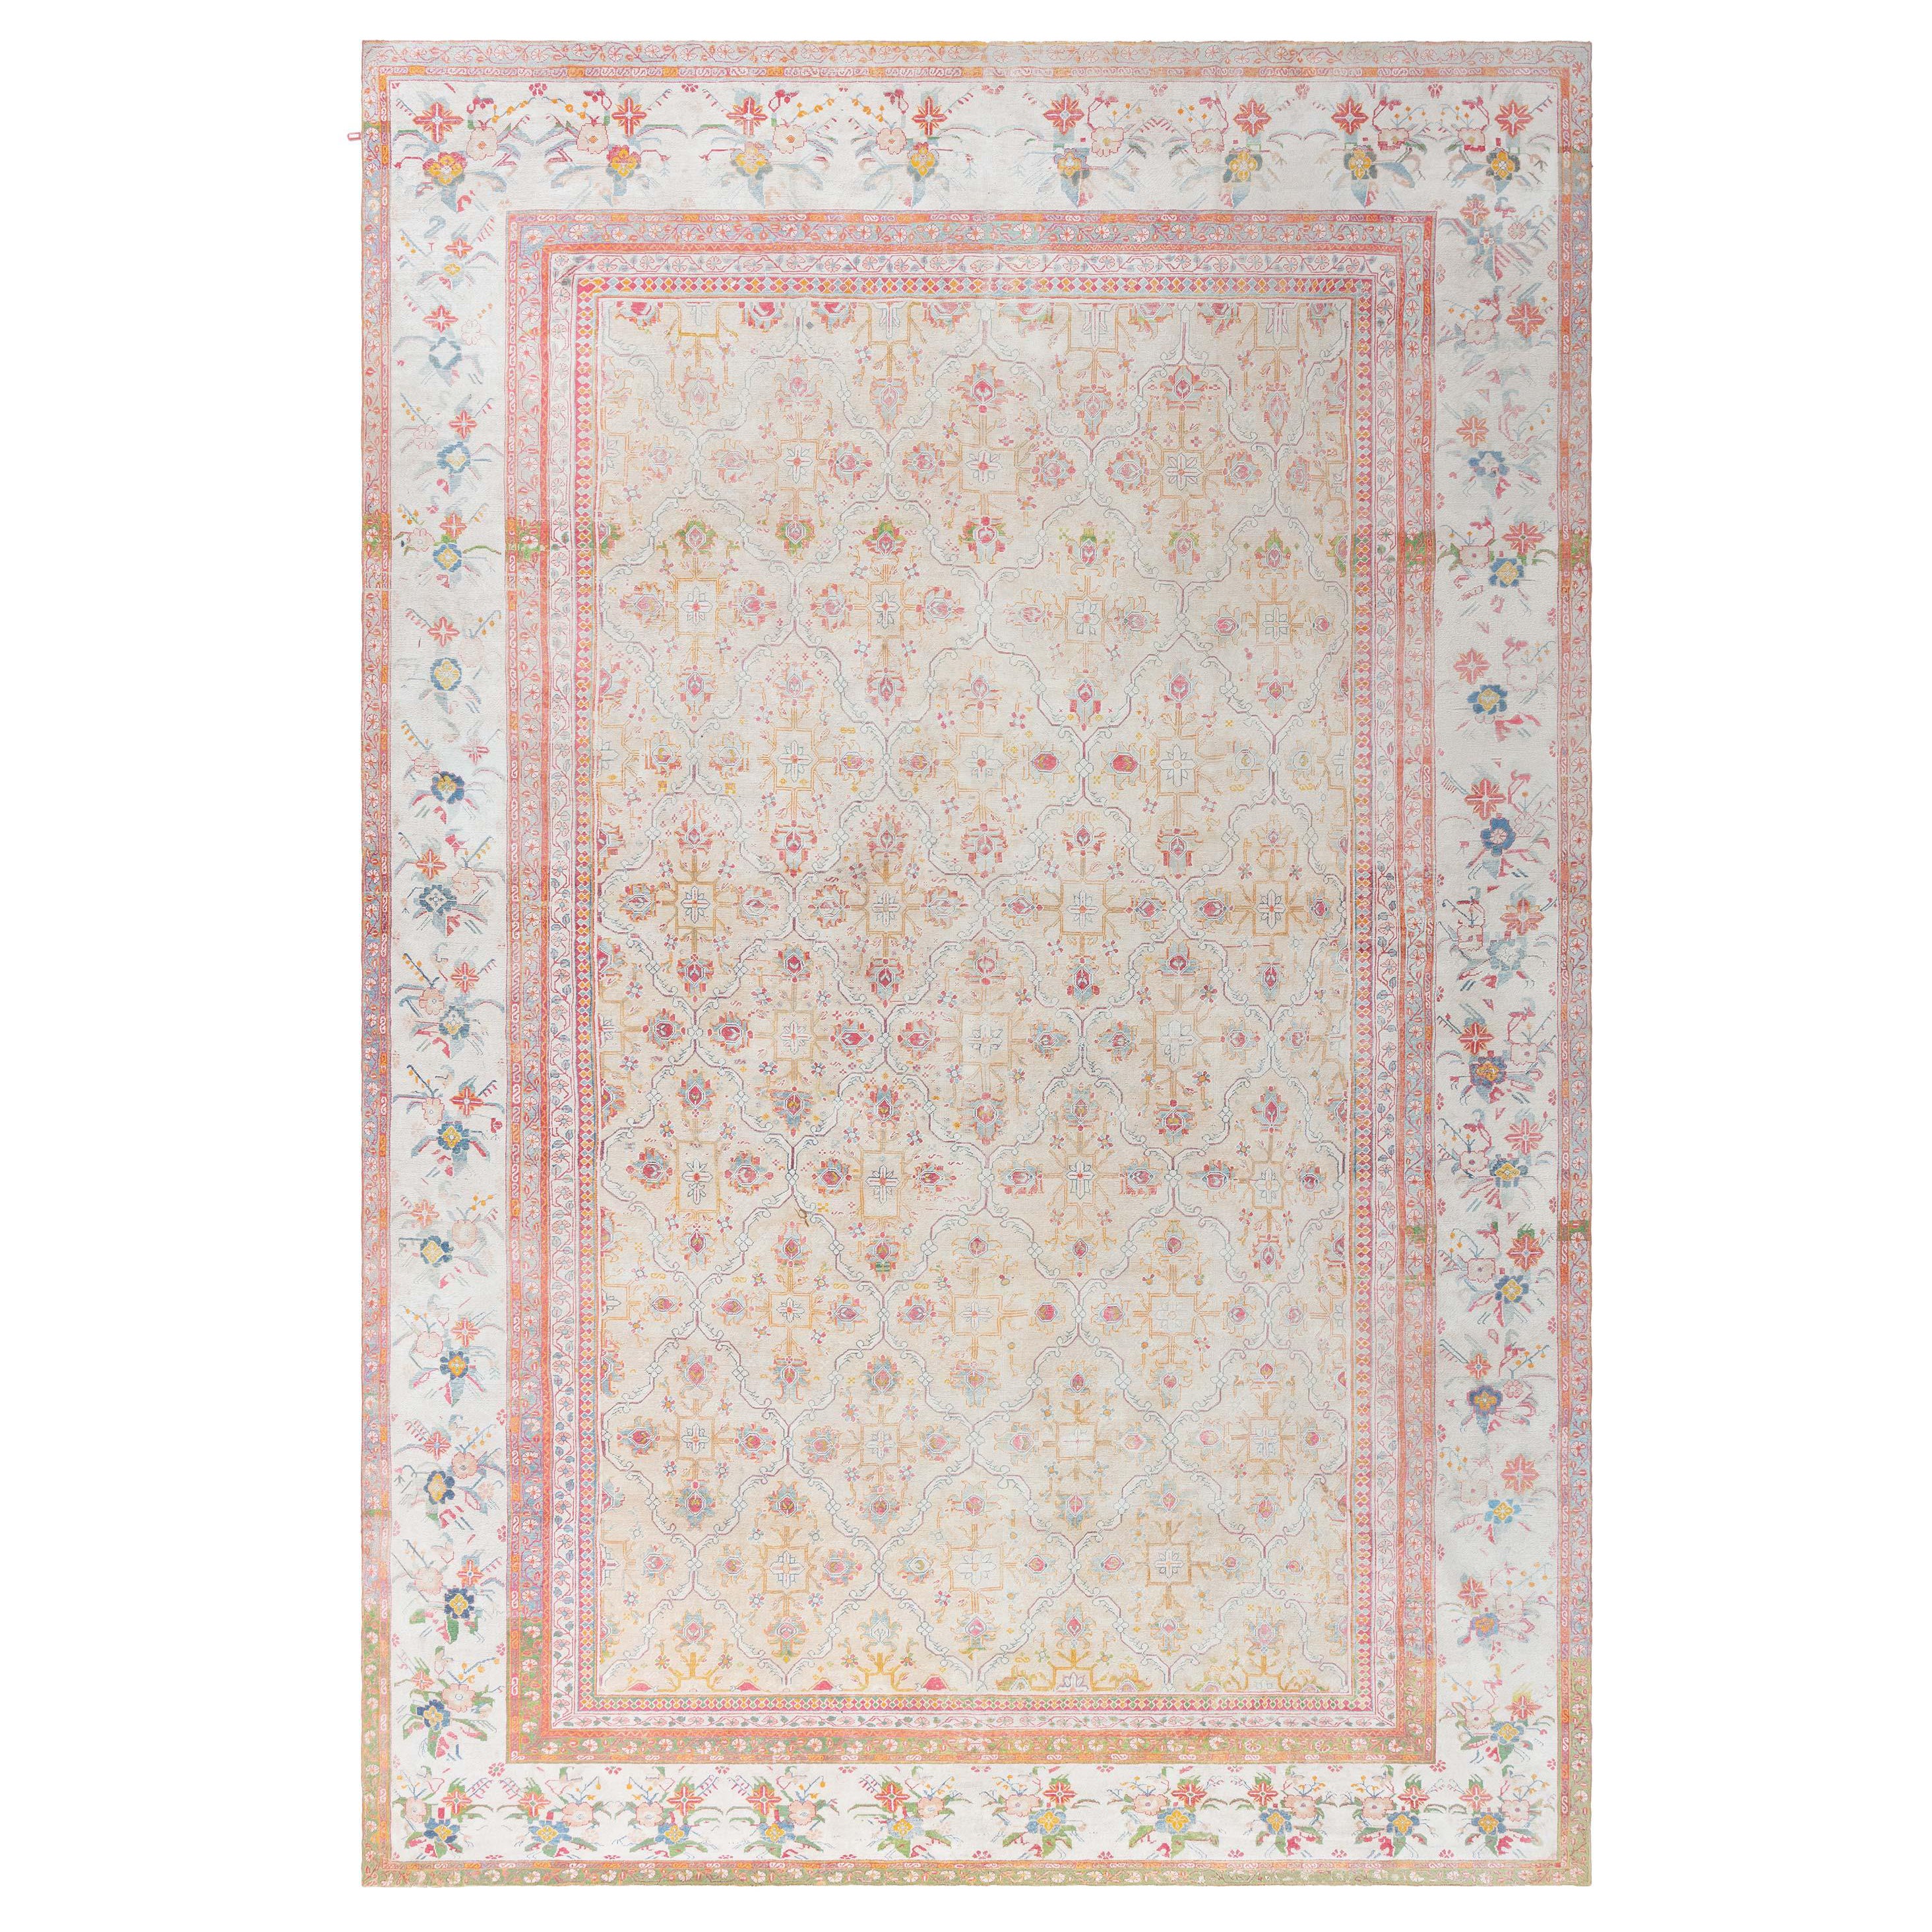 Early 20th Century Indian Agra Floral Handmade Cotton Rug For Sale